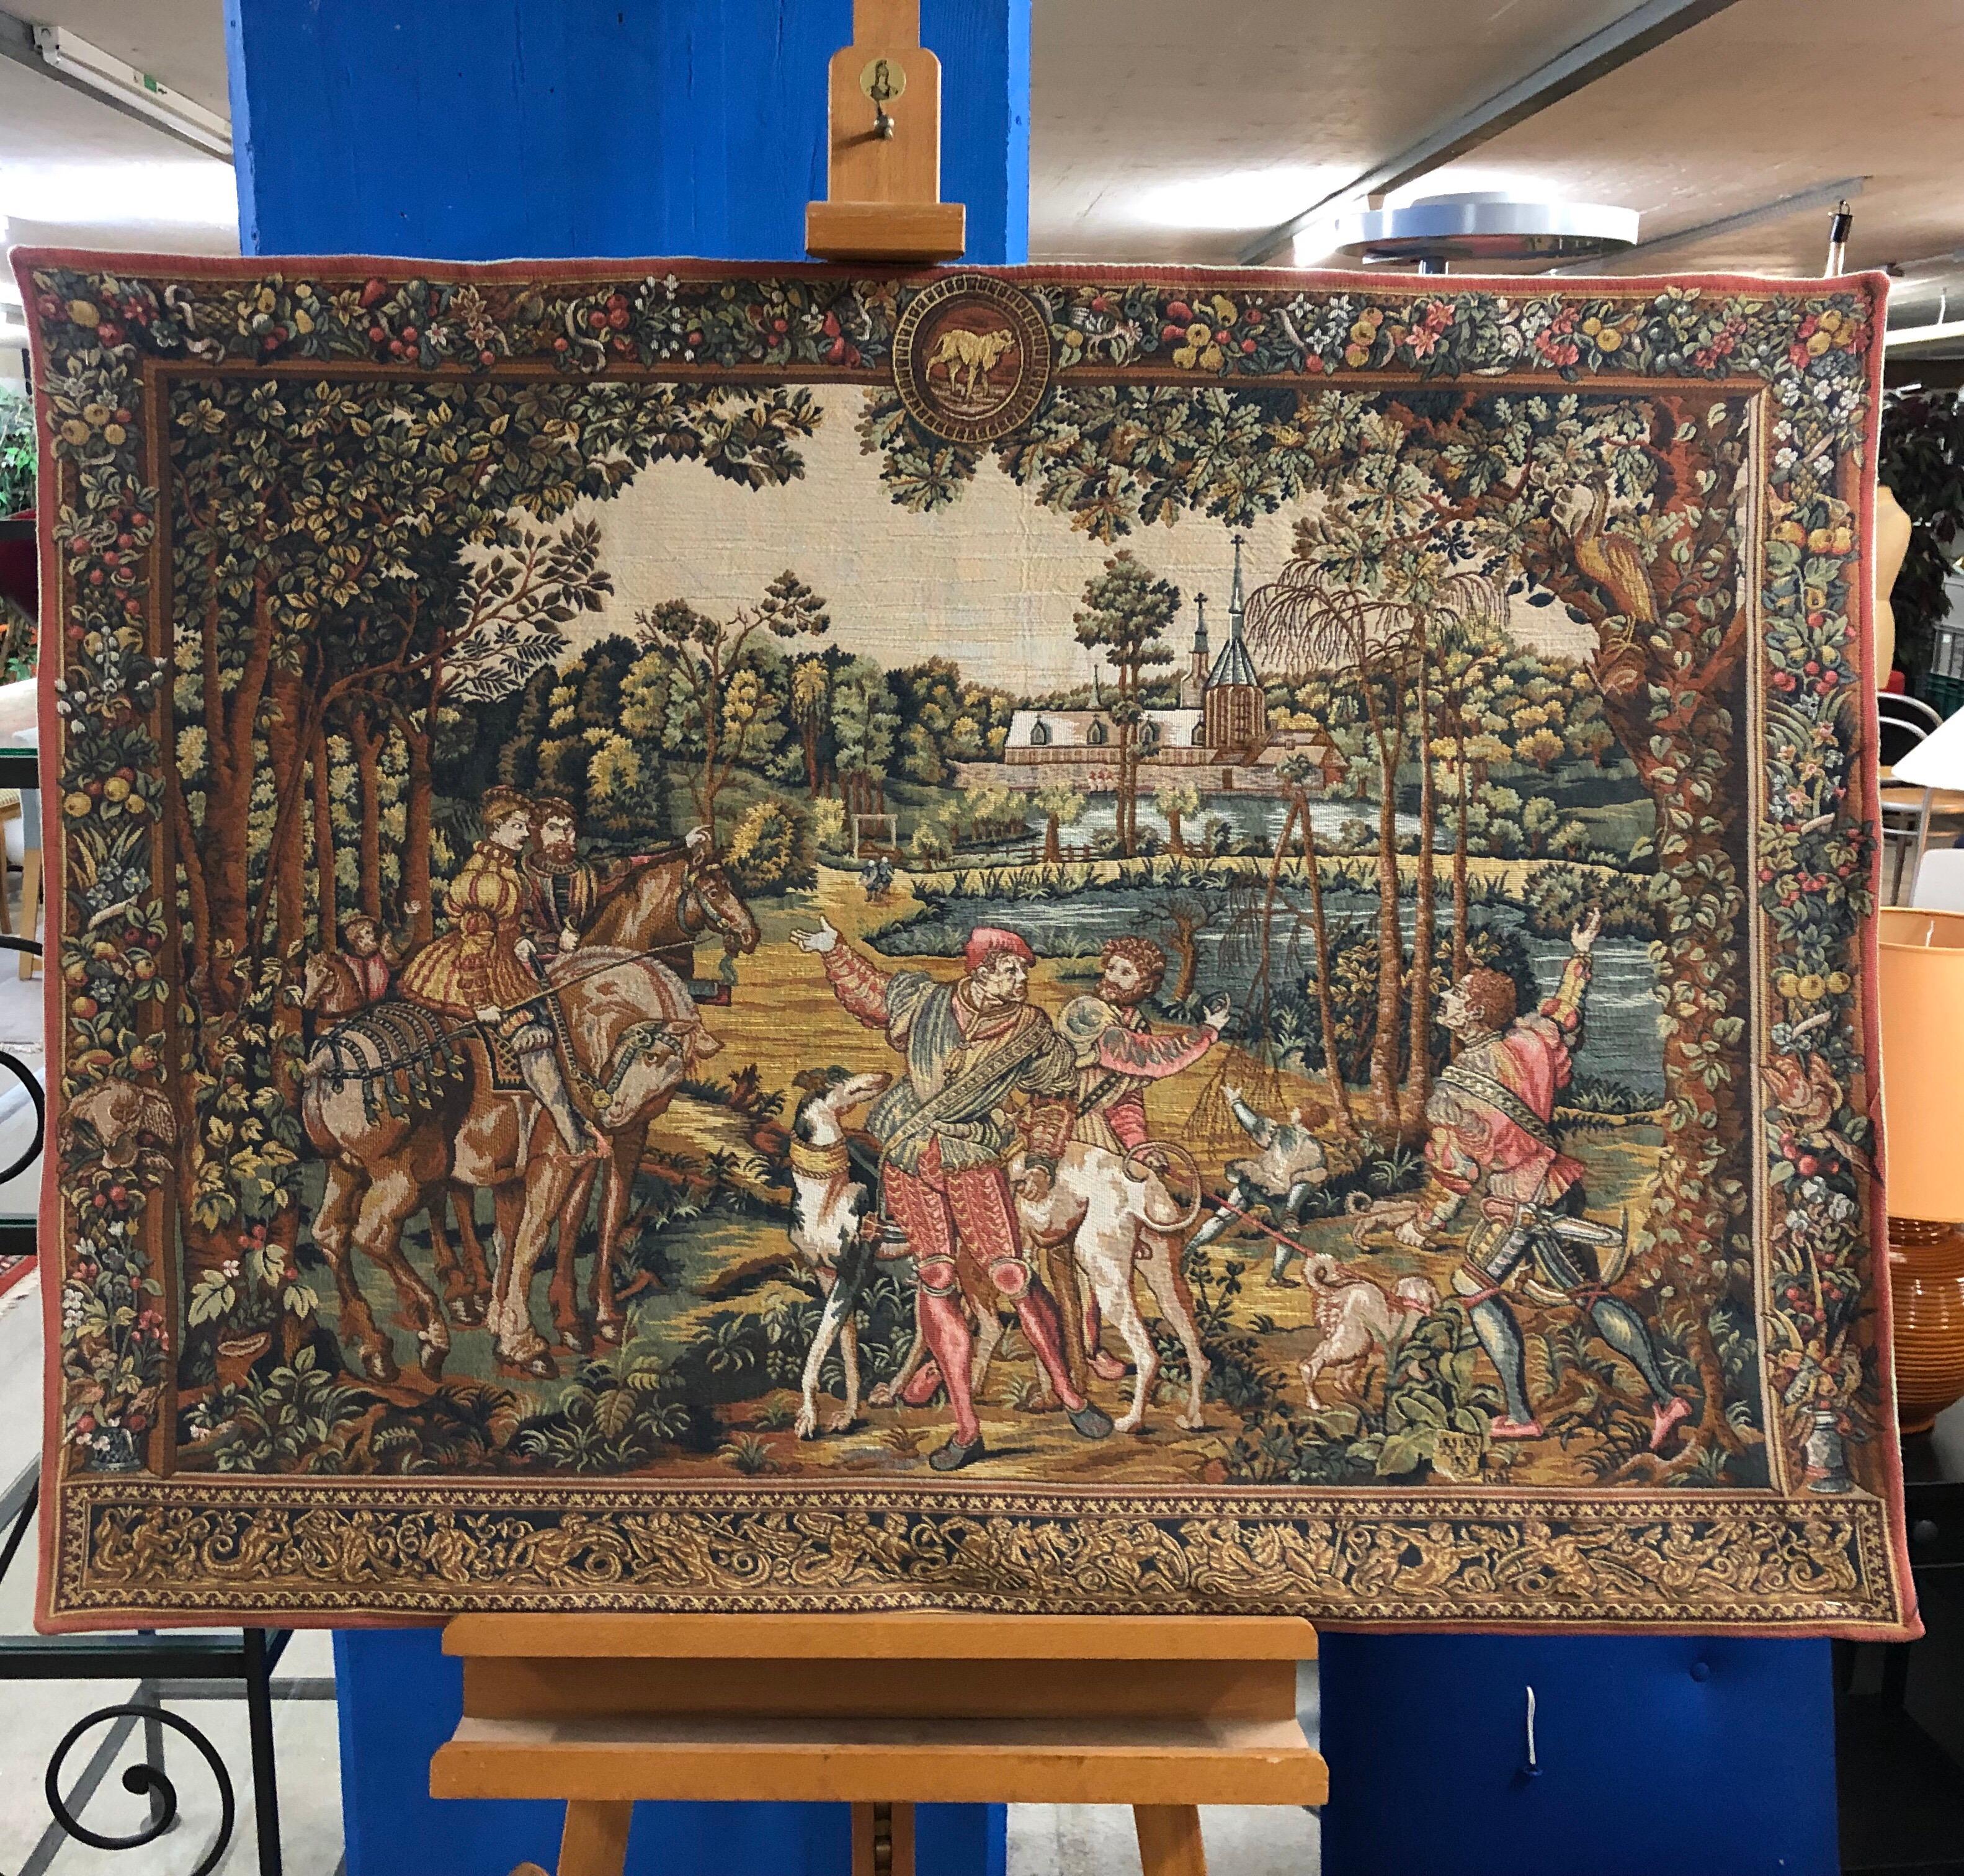 Great machine made tapestry produced in the 20th century 

Tapestry is a form of textile art, traditionally woven by hand on a loom. Tapestry is weft-faced weaving, in which all the warp threads are hidden in the completed work, unlike cloth